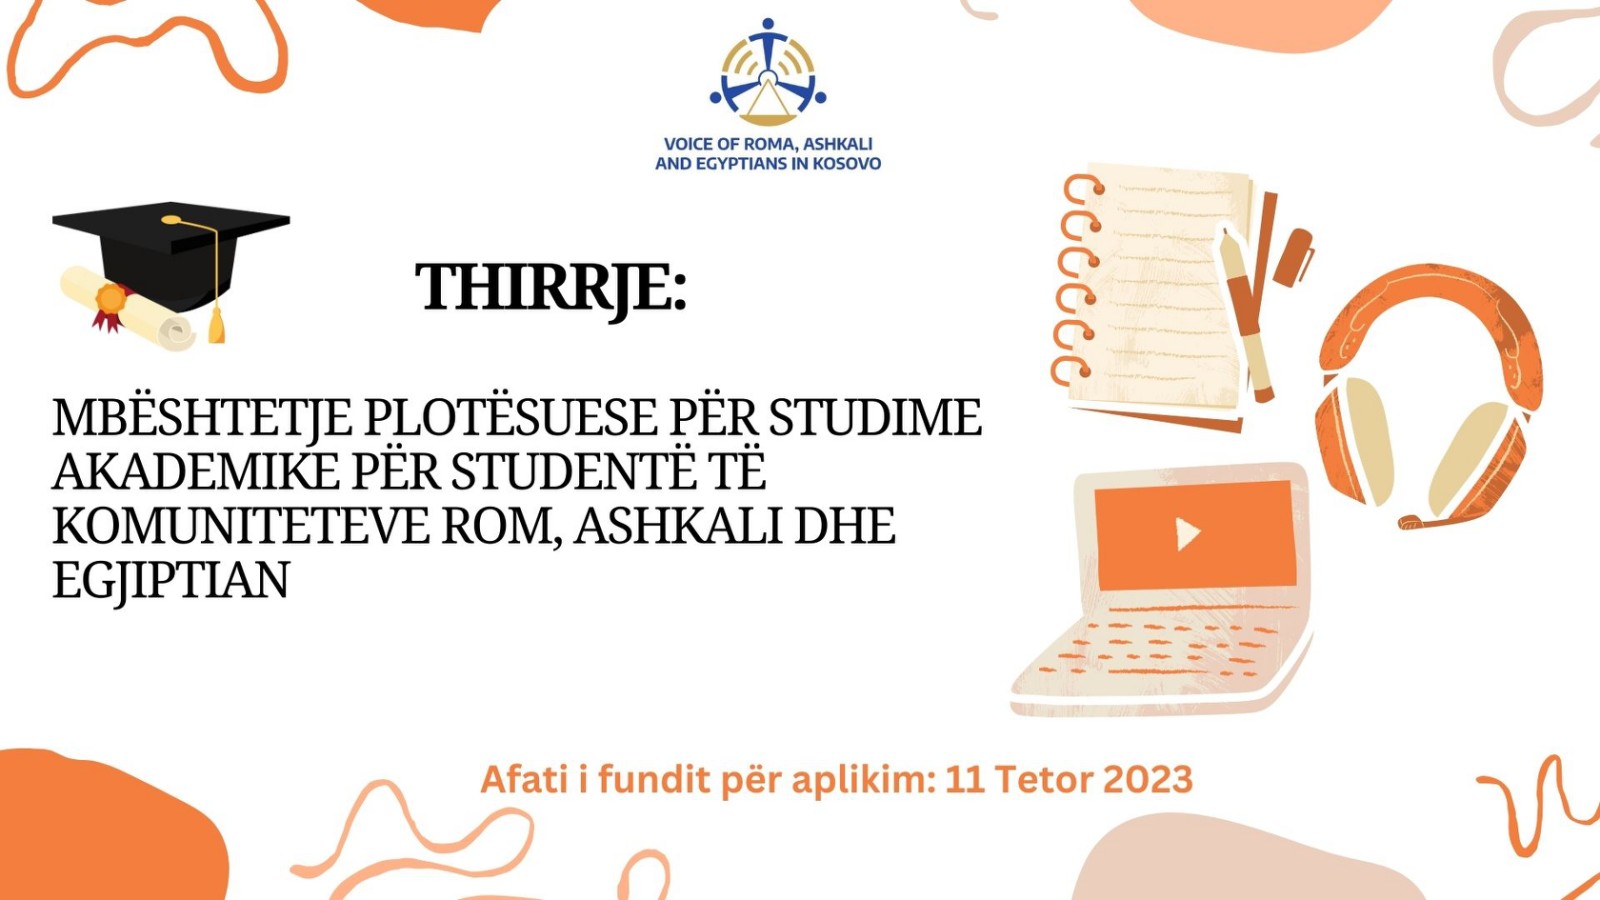 CALL: Supporting academic studies for students from the Roma, Ashkali and Egyptian communities